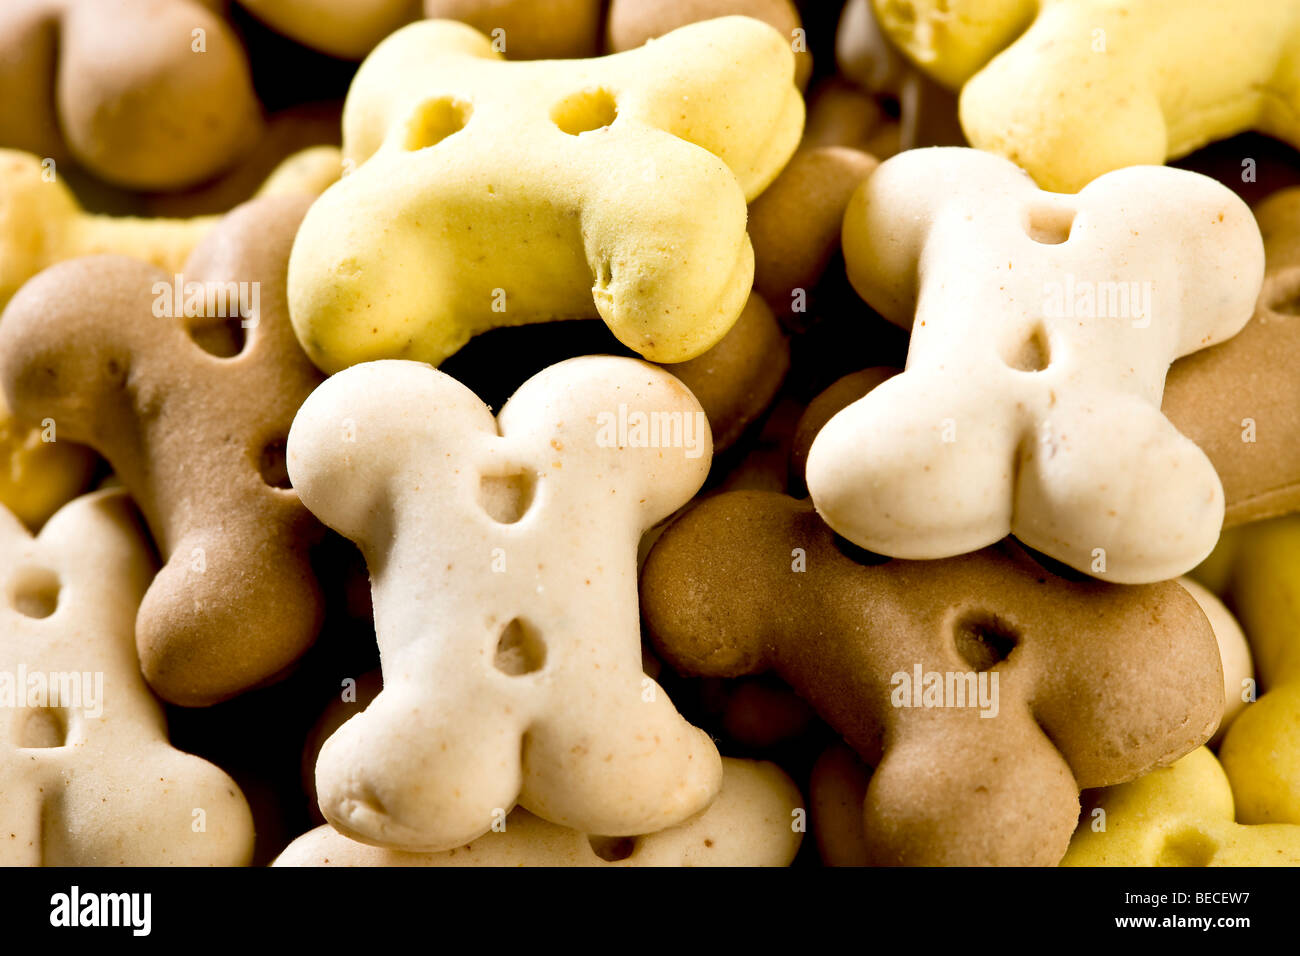 Dog biscuits Stock Photo